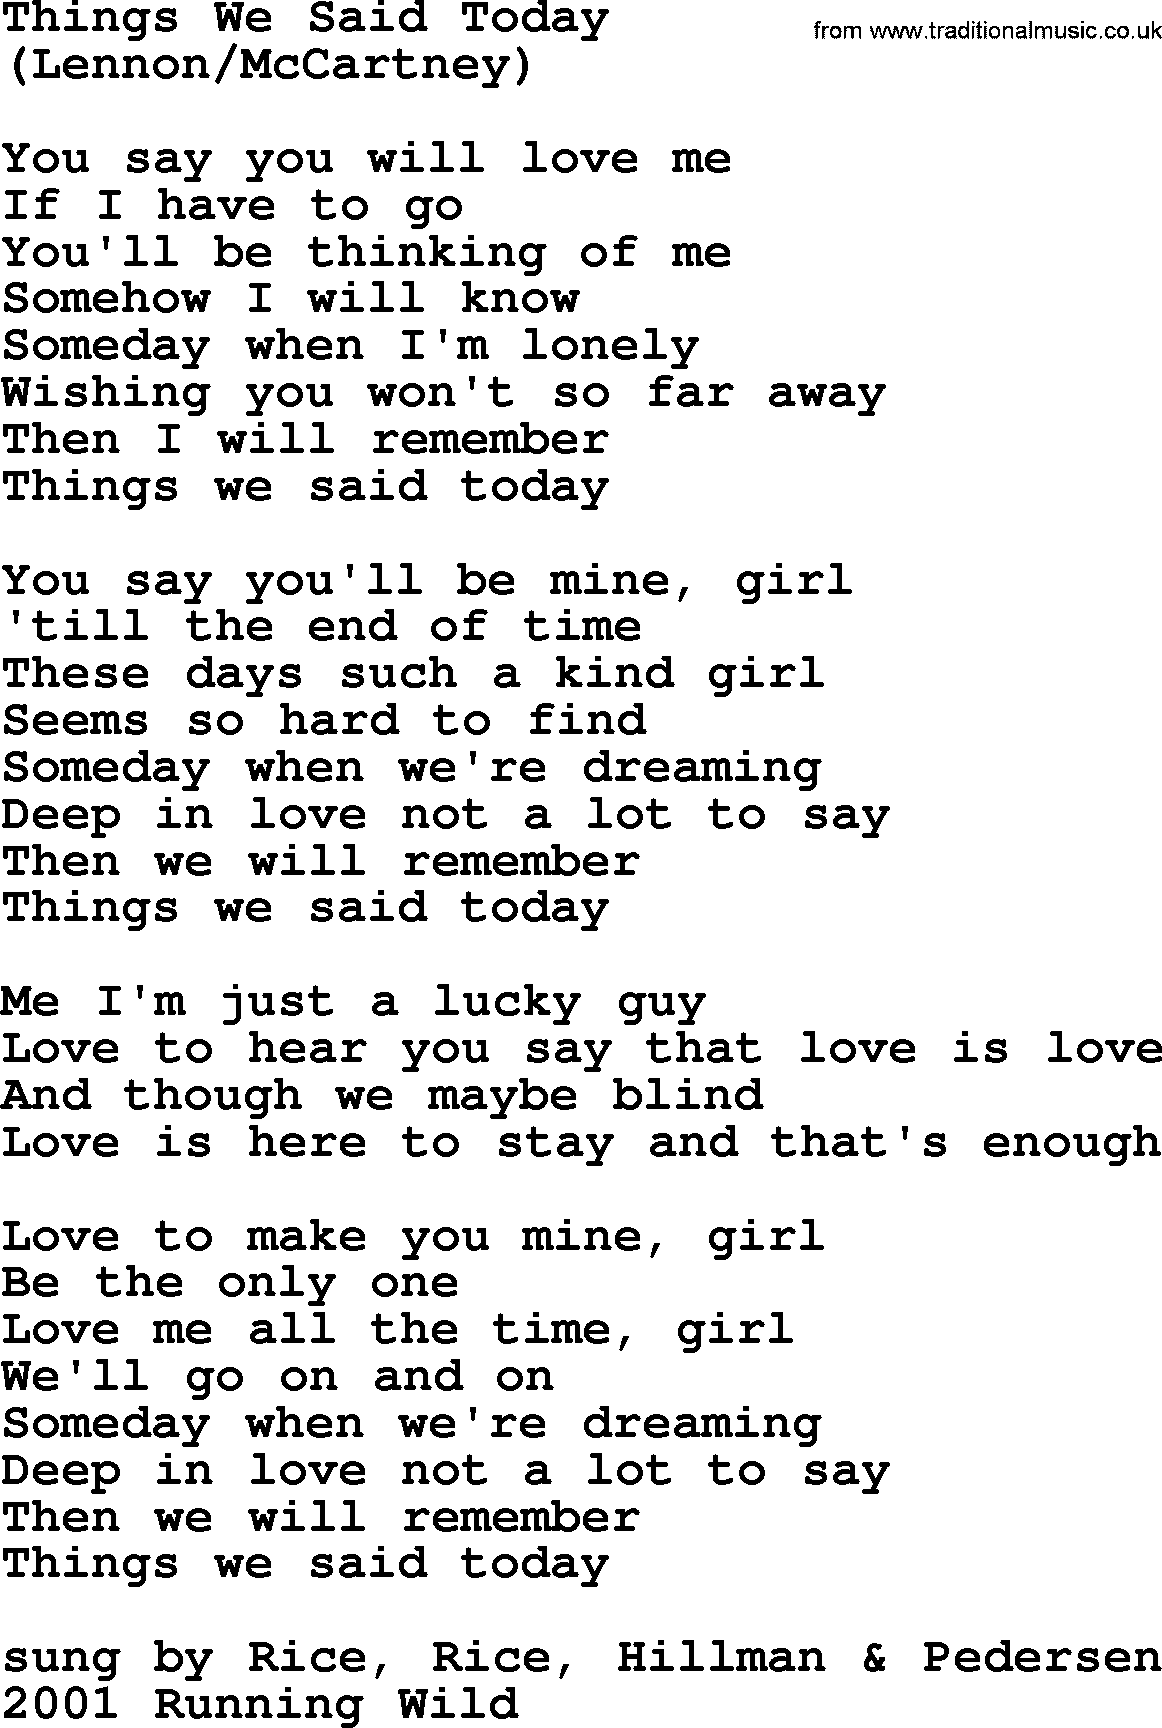 The Byrds song Things We Said Today, lyrics